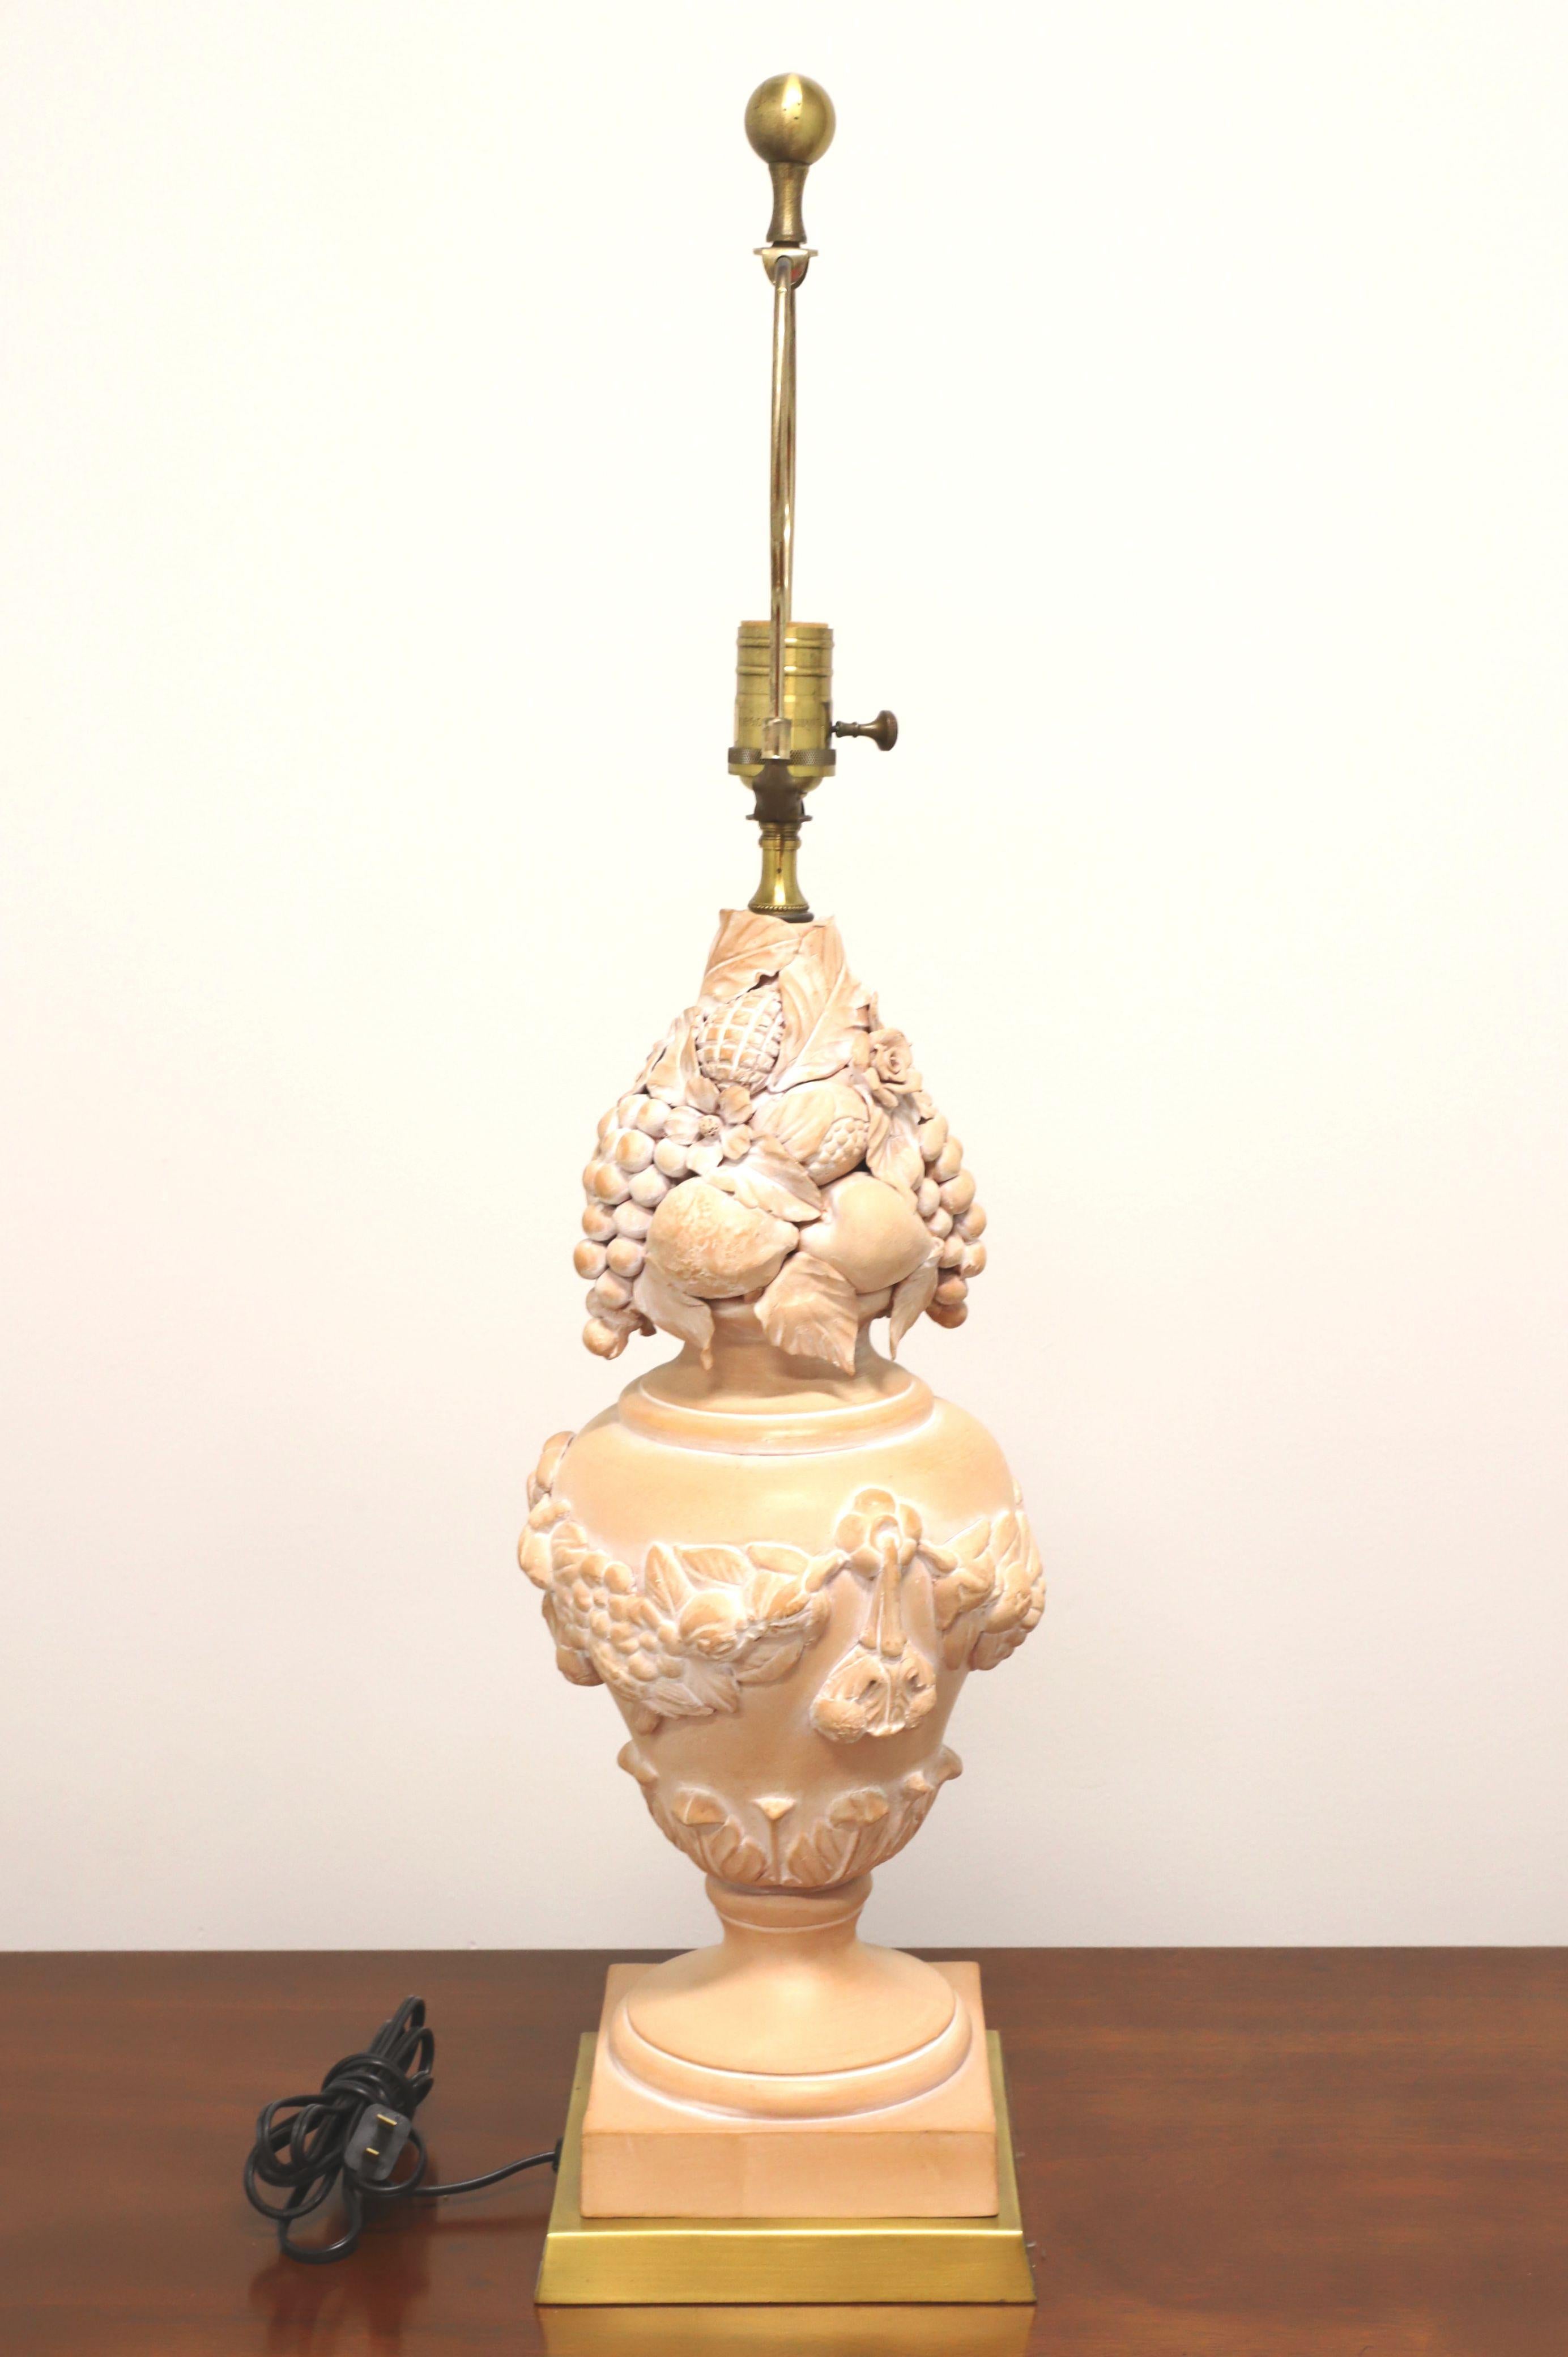 An Italian Tuscan style table lamp, unbranded. Made of terra cotta in an urn shape adorned with a fruit & floral motif, salmon & white in color, and a brass base. Has a removable brass harp and brass ball finial. Single standard bulb socket and